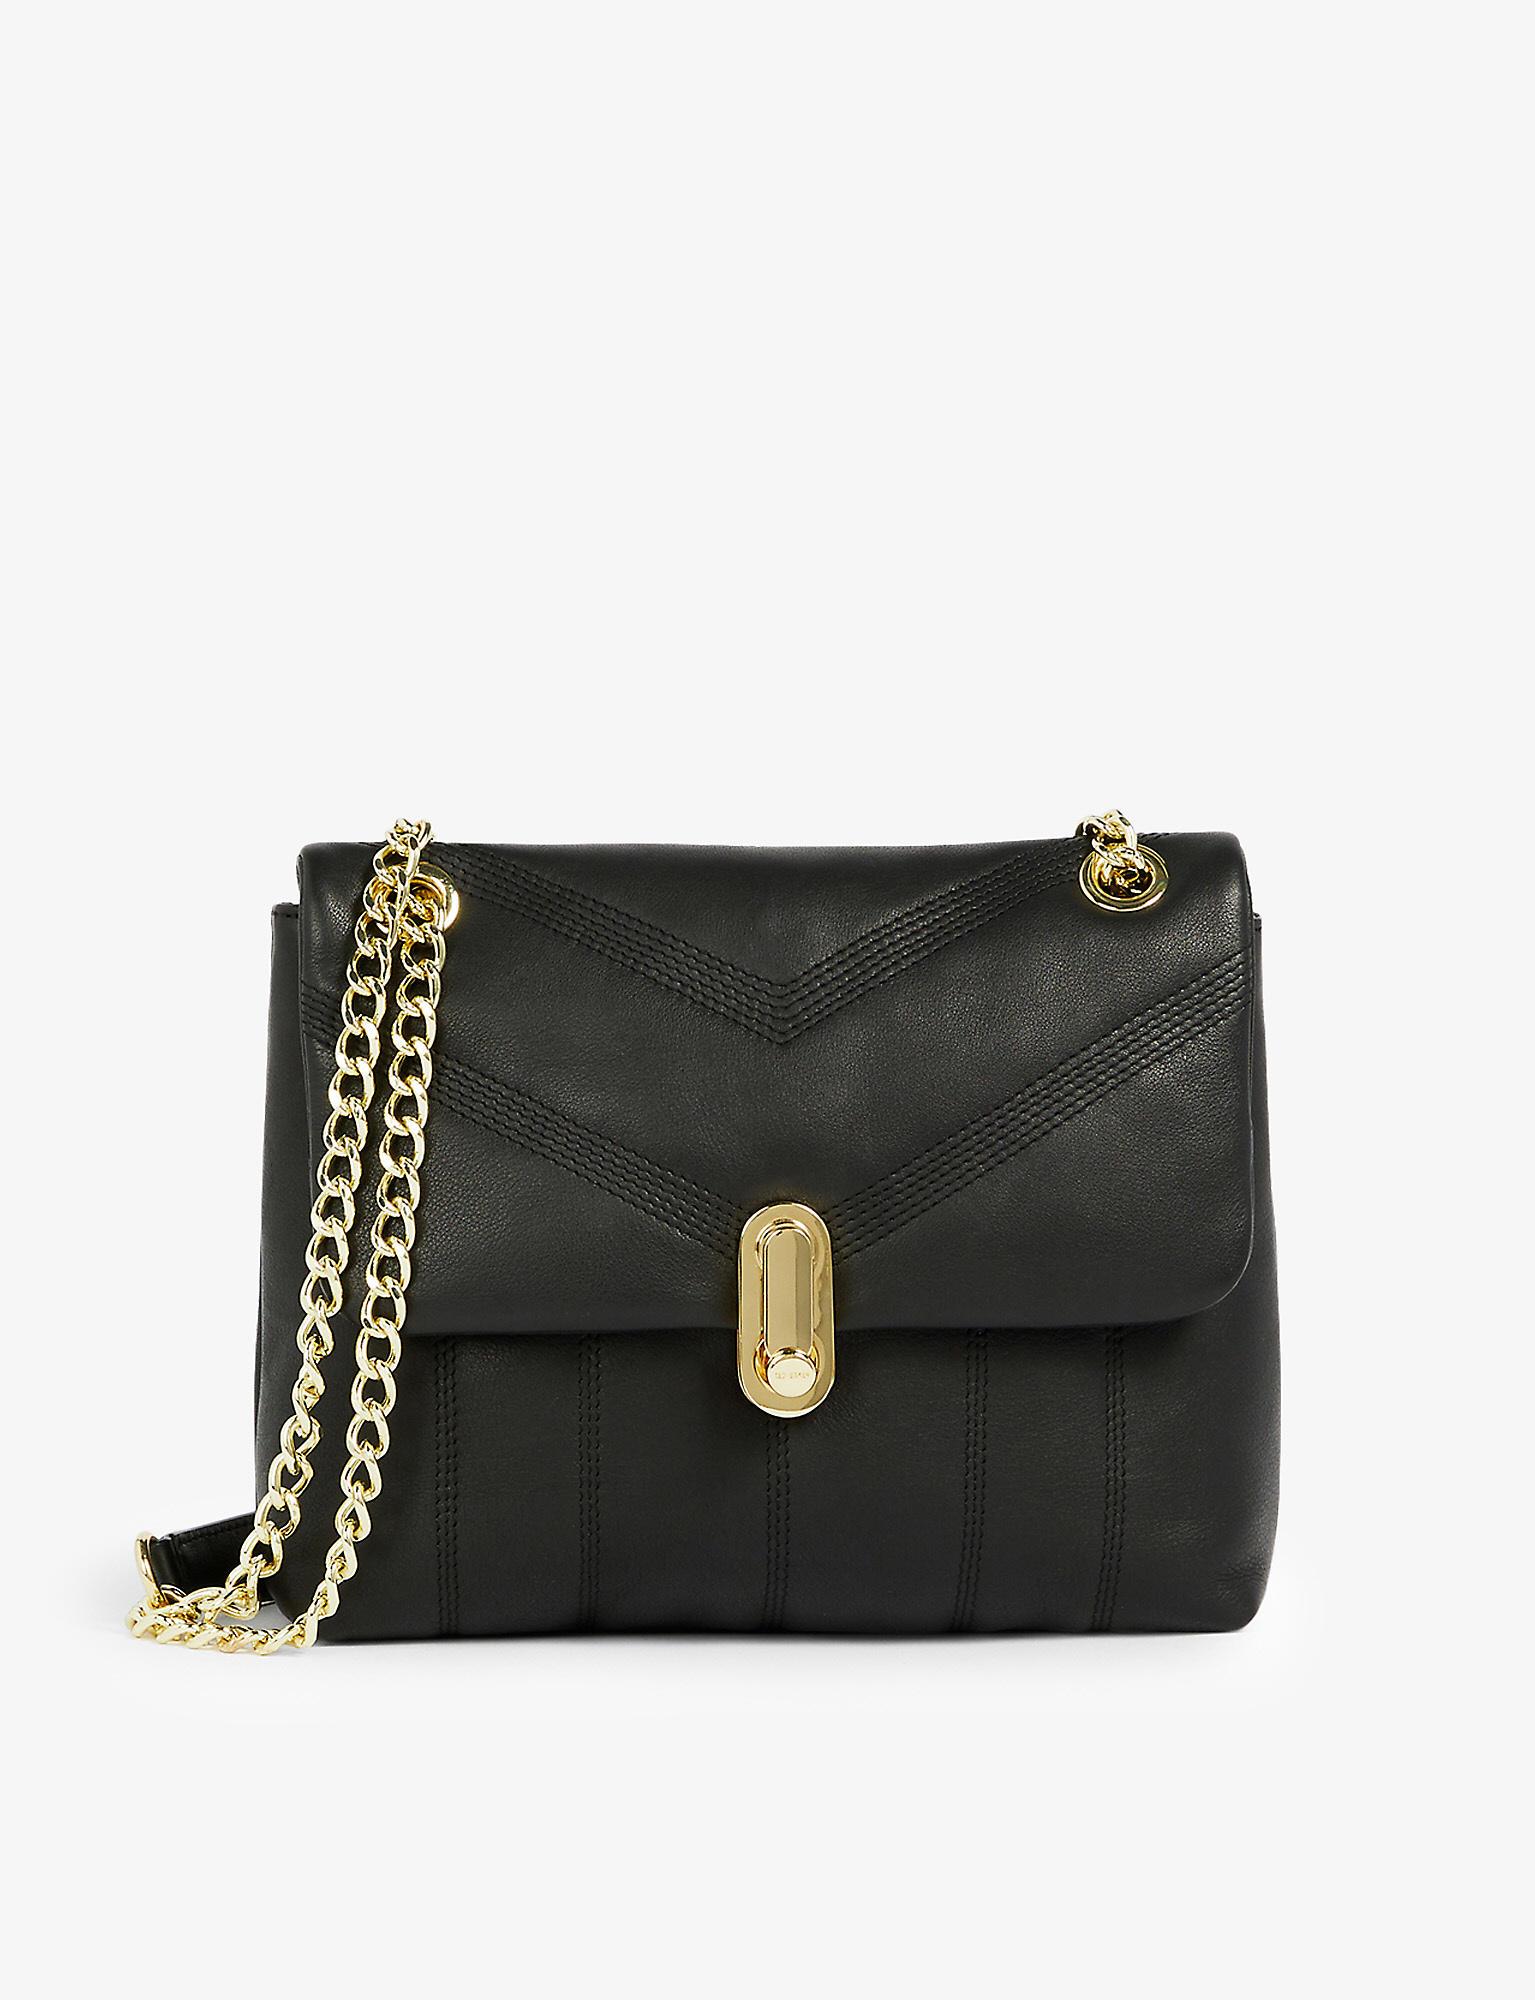 Ted Baker Ayalina Quilted Leather Cross-body Bag in Black | Lyst